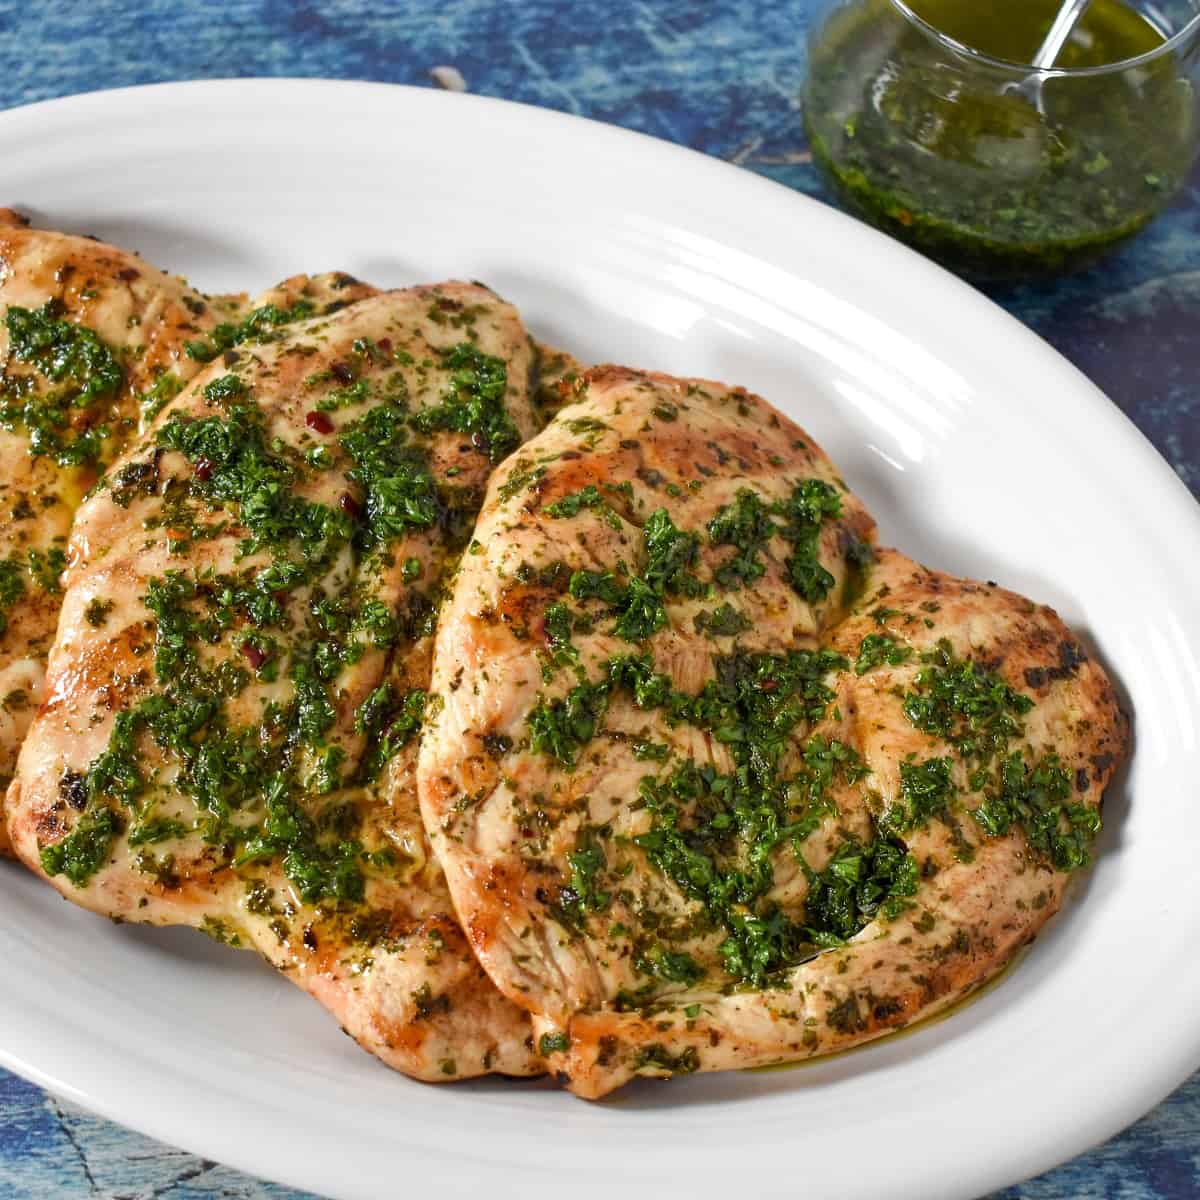 An image of the grilled chicken breast topped with chimichurri and set on a white platter.